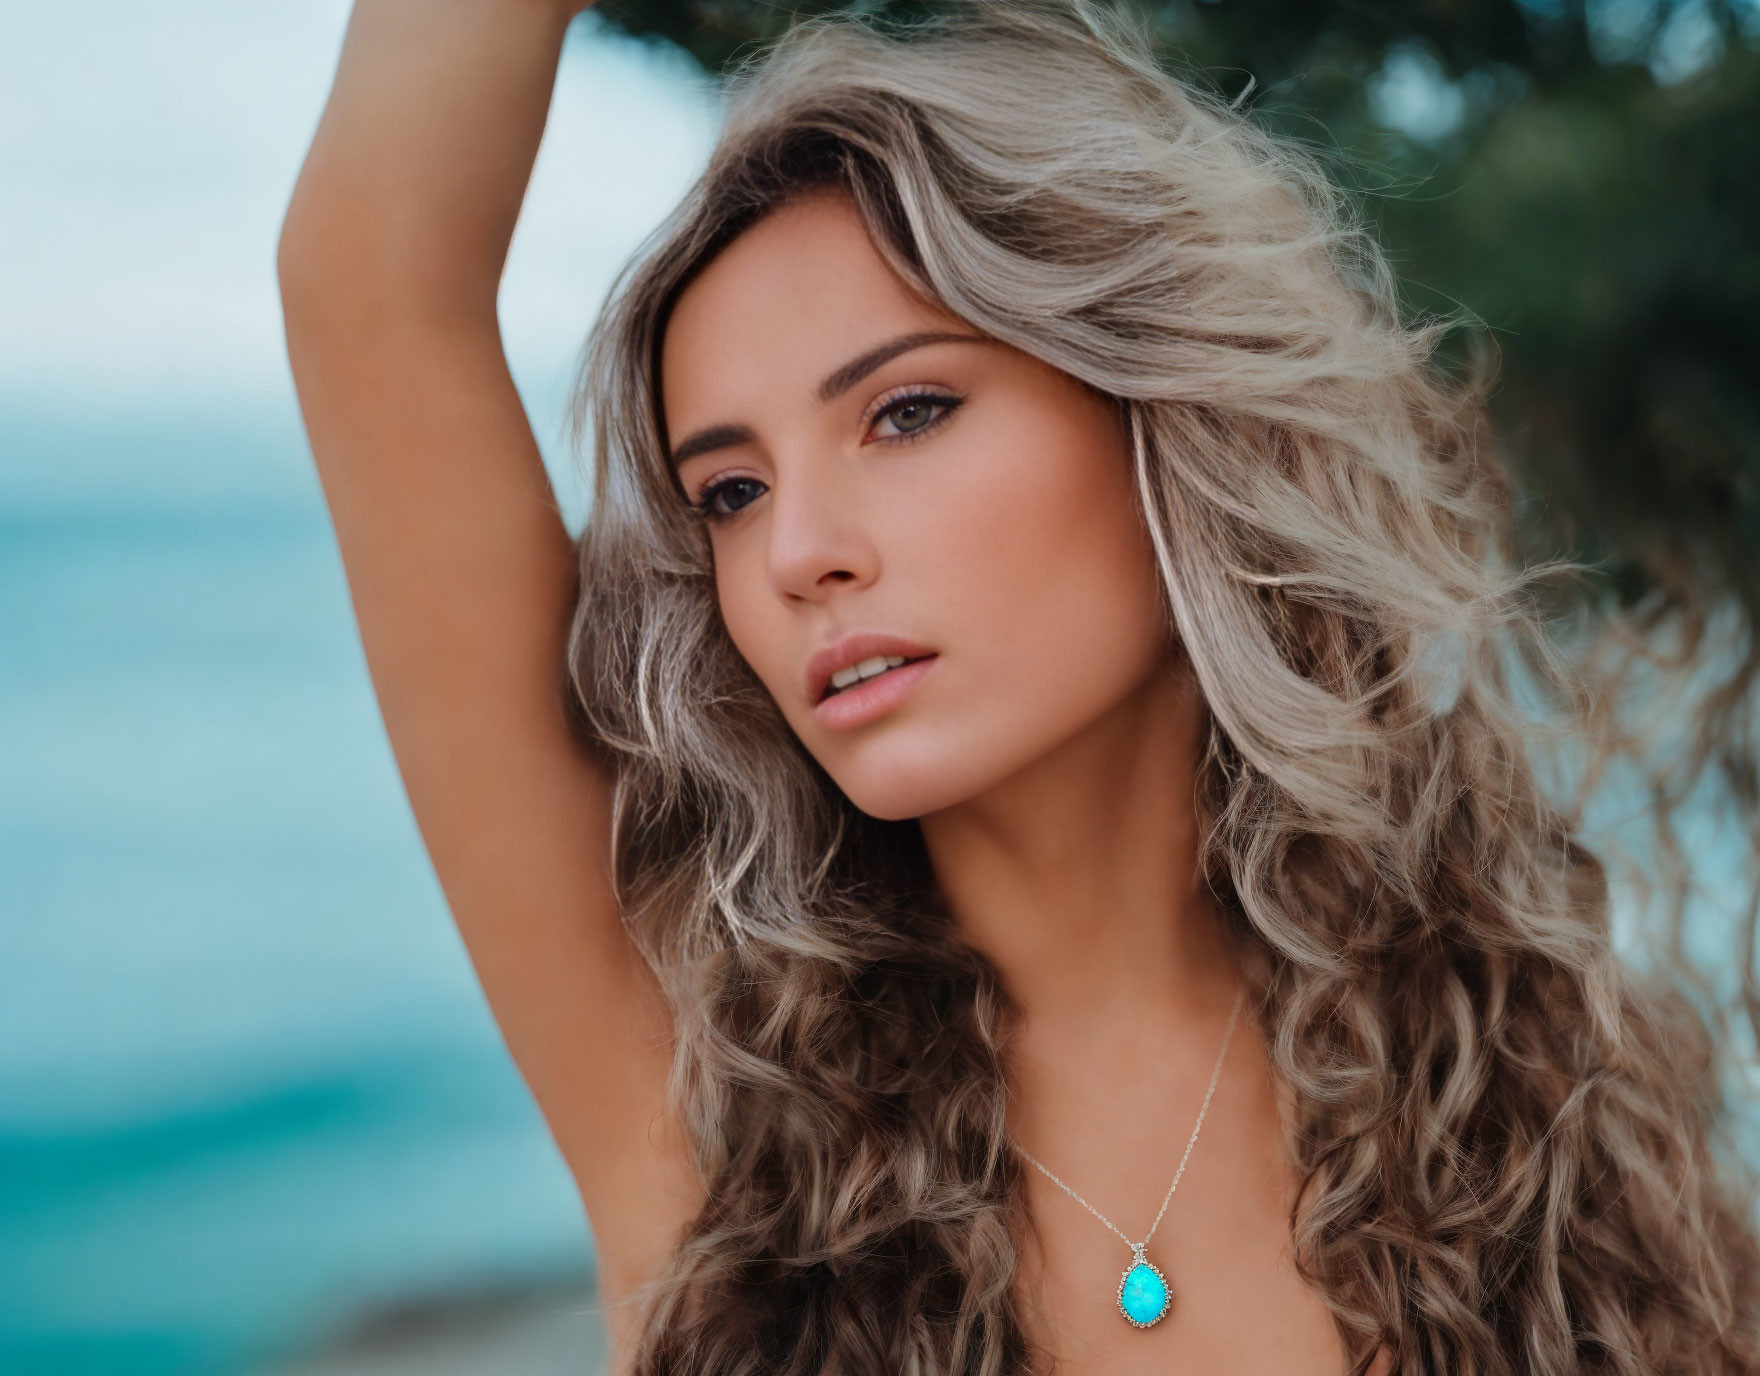 Wavy-haired woman in turquoise necklace gazes at seaside.